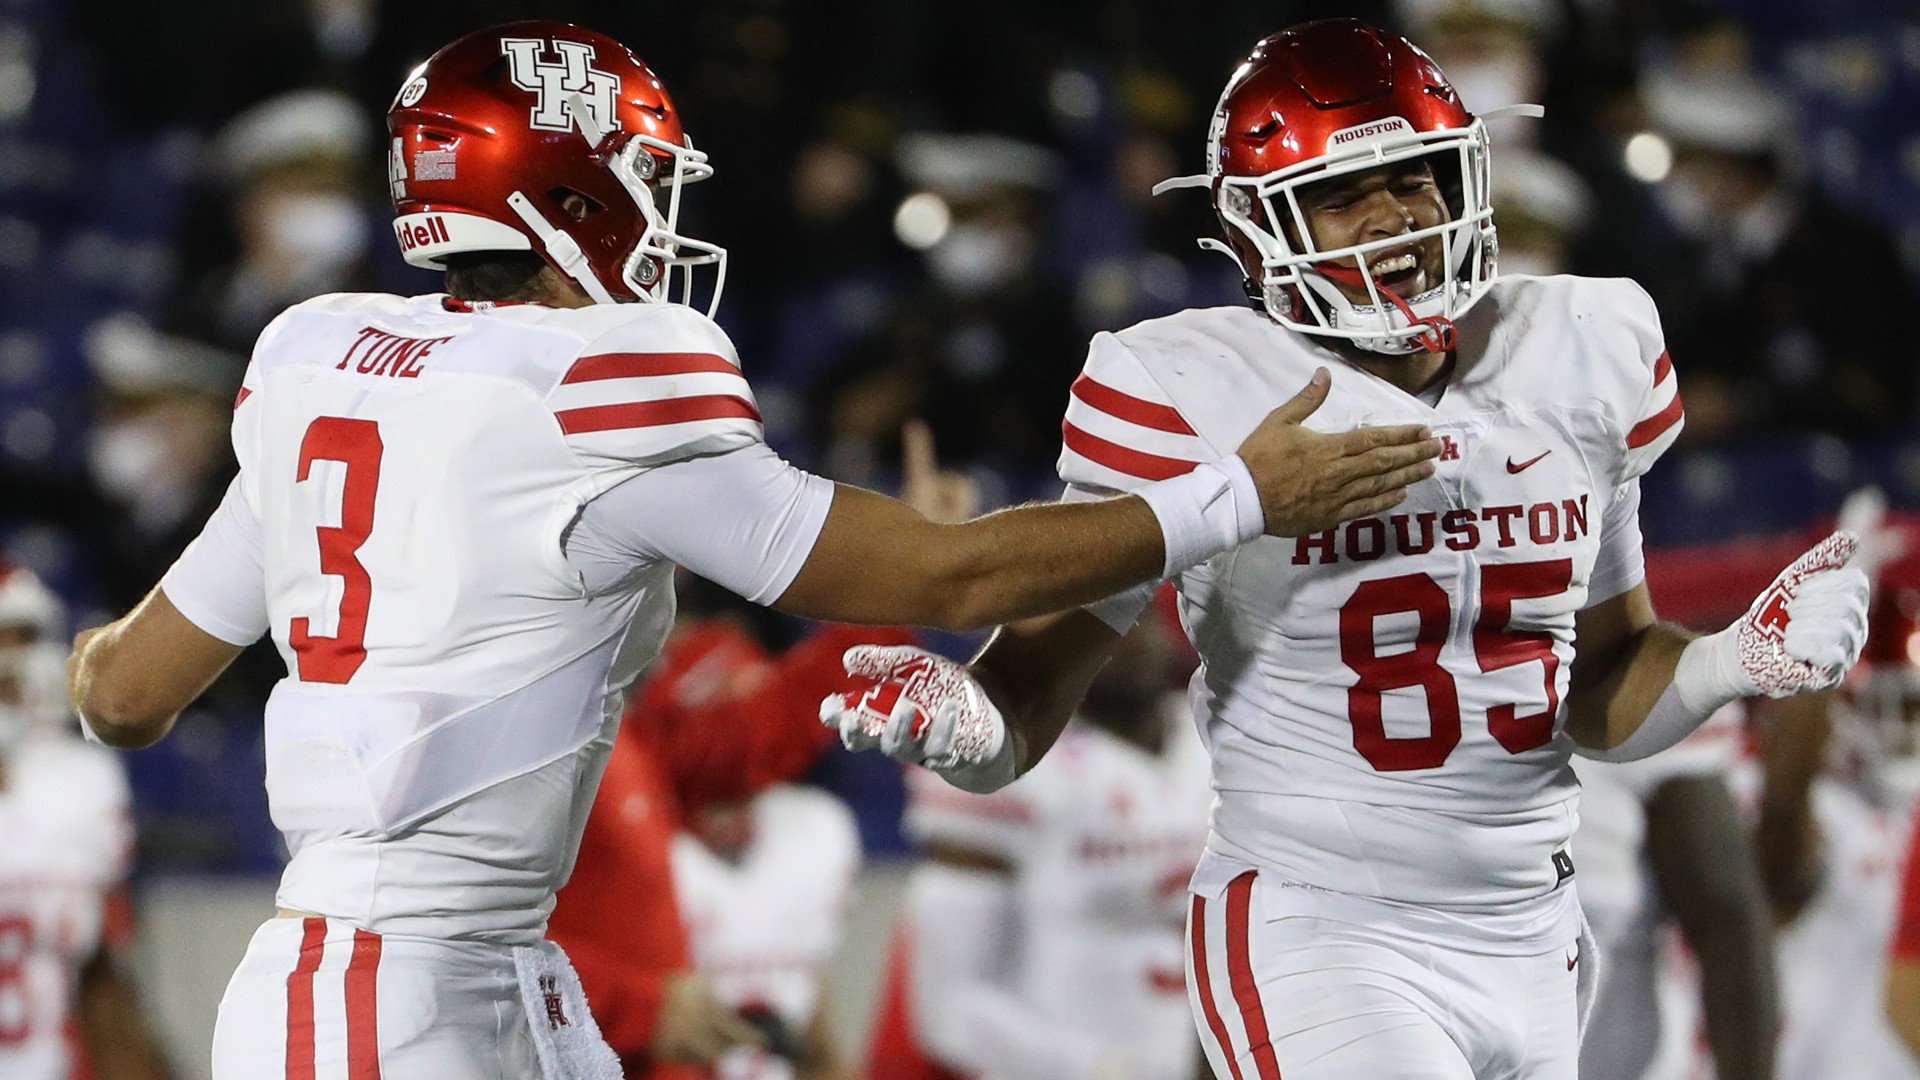 UCF vs. Houston Betting Odds & Pick: Betting Value on Knights For Saturday’s Game article feature image